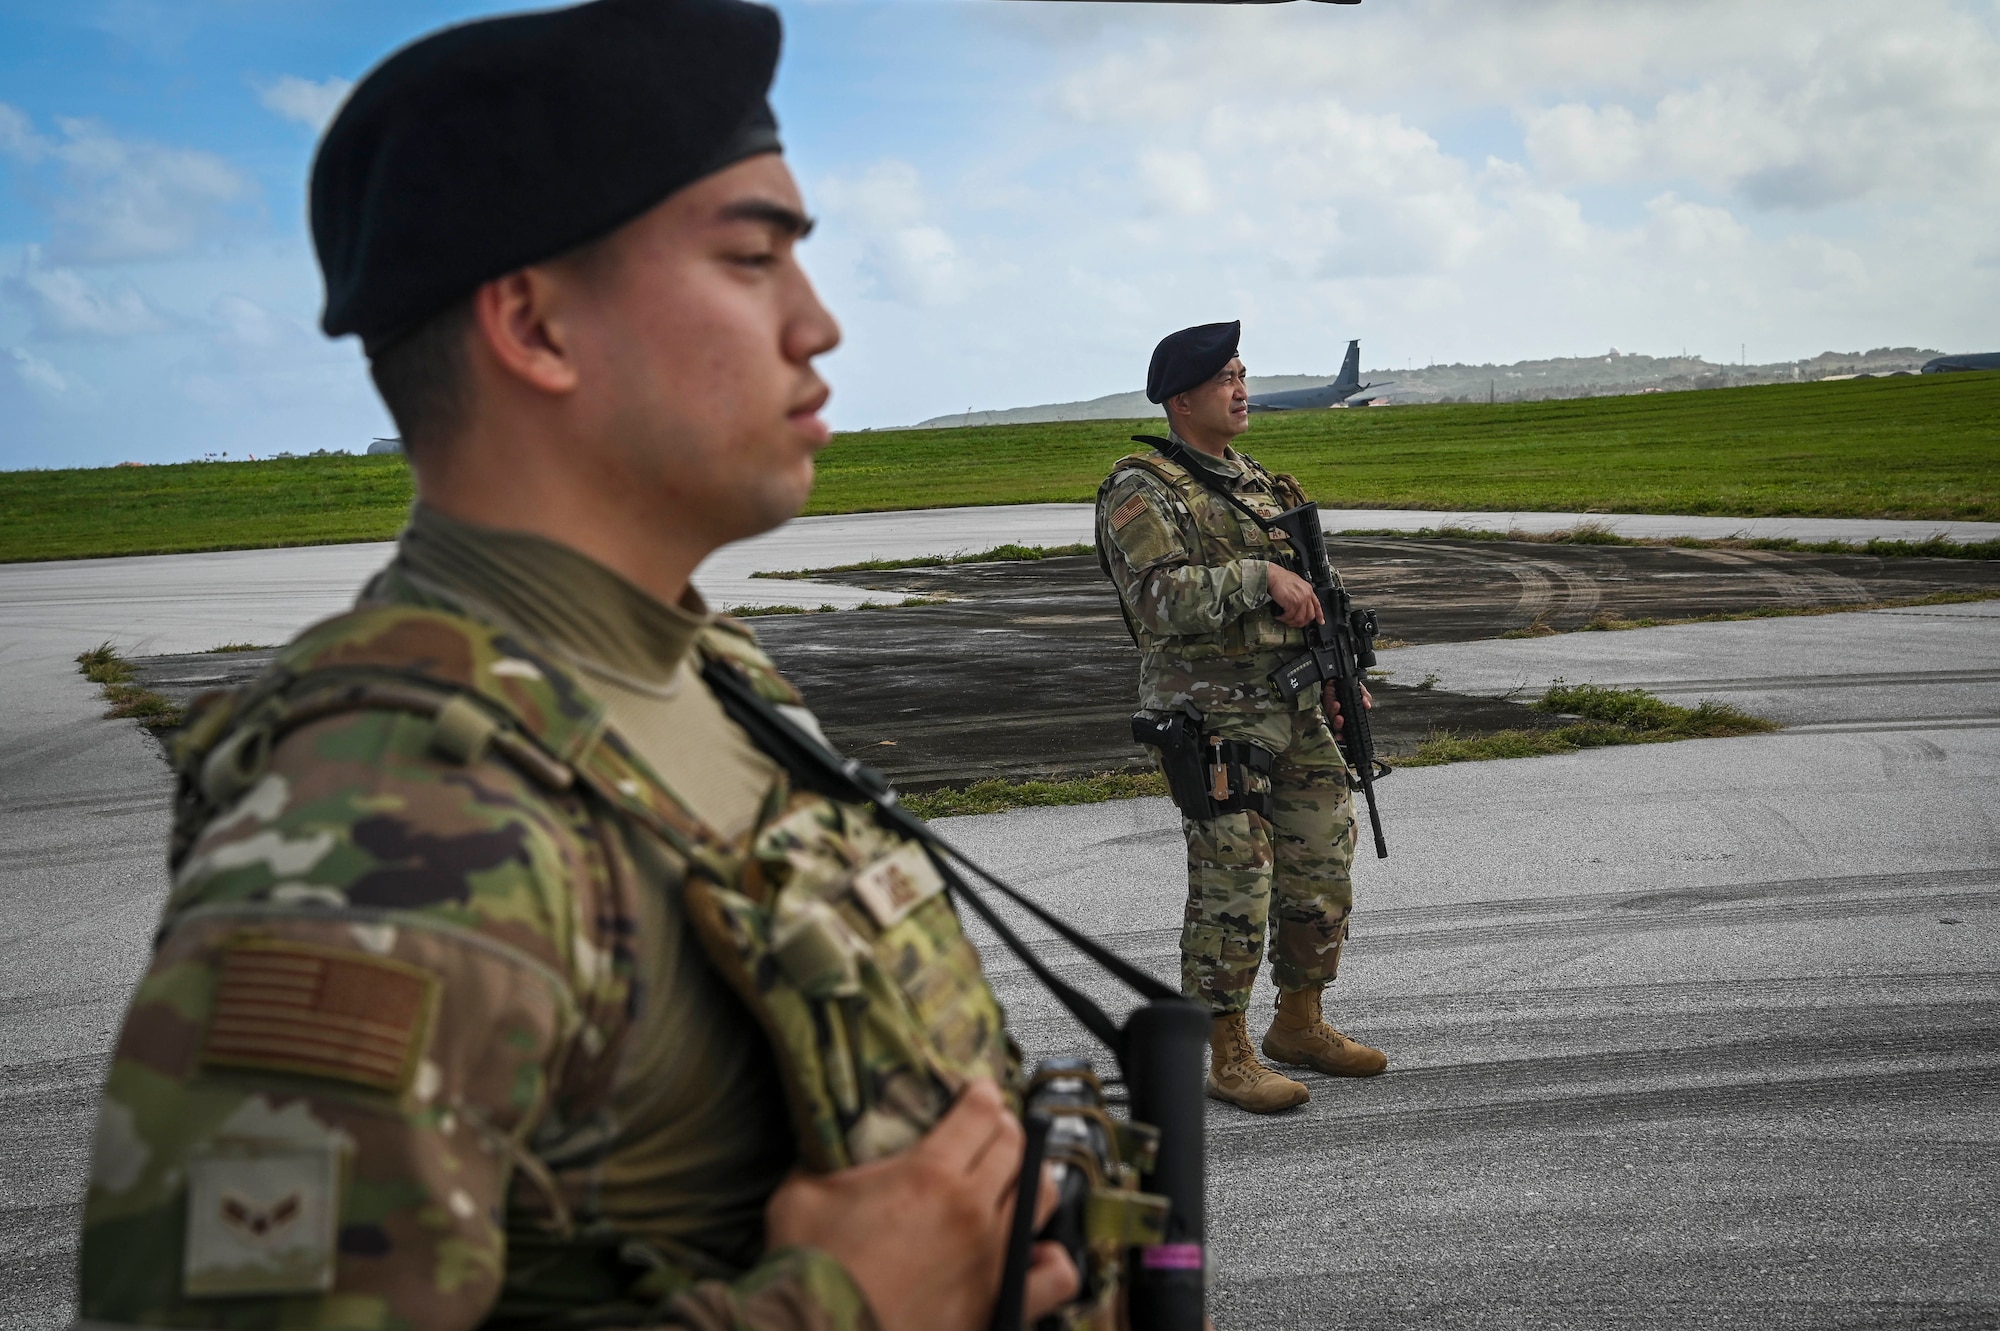 U.S. Air Force Airman 1st Class Brayven Chase (left) and USAF Tech. Sgt. Jude Camemo, assigned to the 254th Security Forces Squadron, provide flight line security during exercise Cope North 22 on Andersen Air Base, Guam, Feb. 14, 2022.